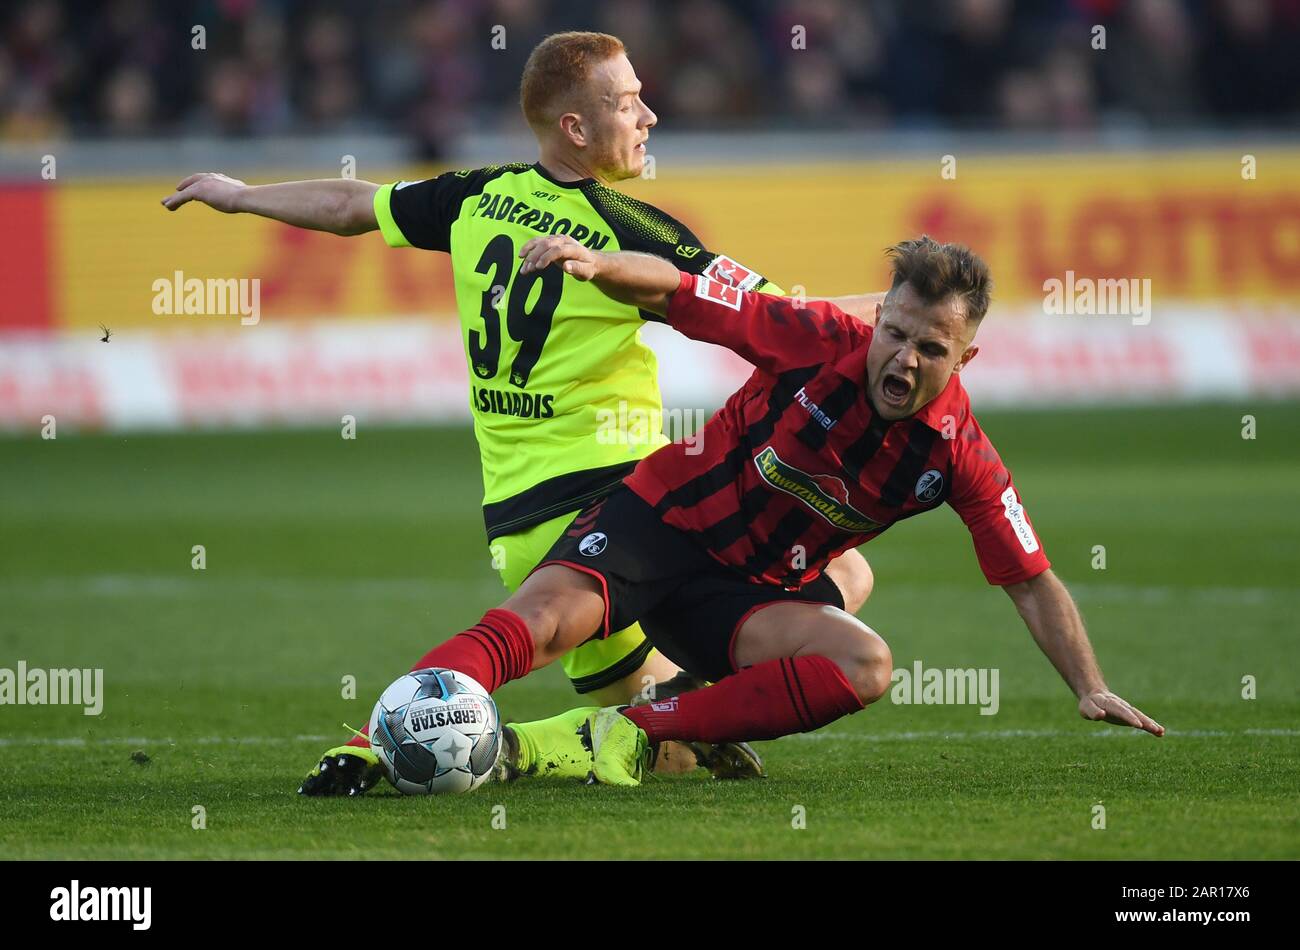 Freiburg, Germany. 25th Jan, 2020. Football: Bundesliga, SC Freiburg - SC Paderborn 07, 19th matchday in the Black Forest Stadium. Sebastian Vasiliadis (l) from Paderborn and Amir Abrashi (r) from Freiburg fight for the ball. Credit: Patrick Seeger/dpa - IMPORTANT NOTE: In accordance with the regulations of the DFL Deutsche Fußball Liga and the DFB Deutscher Fußball-Bund, it is prohibited to exploit or have exploited in the stadium and/or from the game taken photographs in the form of sequence images and/or video-like photo series./dpa/Alamy Live News Credit: dpa picture alliance/Alamy Live Ne Stock Photo